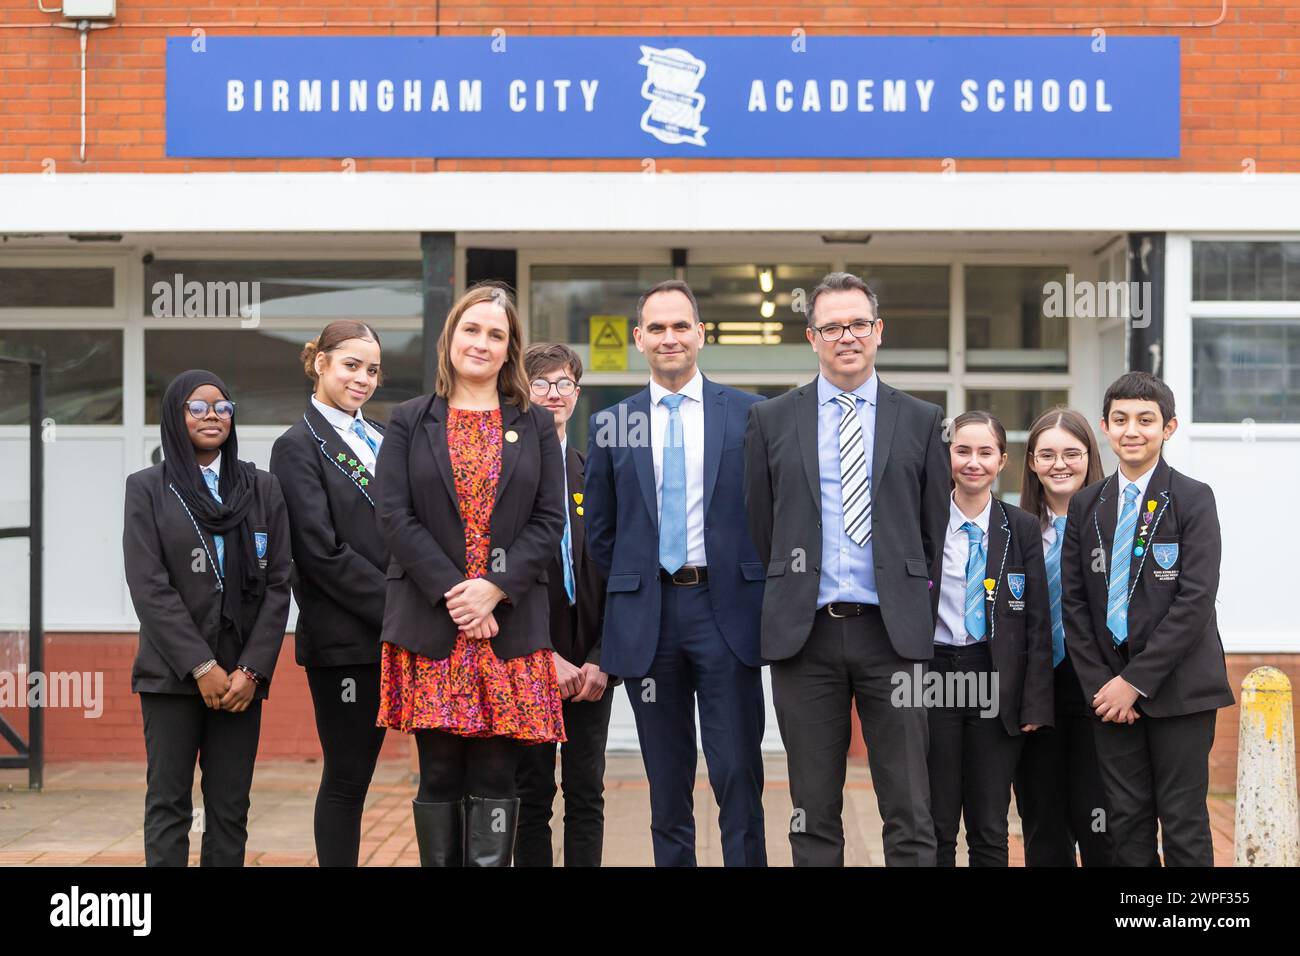 Birmingham, UK. 7th March, 2024. Balhaam Wood Academy in Frankley, Birmingham, UK, celebrates gaining its first 'Good' Ofsted status in 18 years after joining the prestigious King Edward VI Foundation Birmingham in 2019. Headteacher Damian McGarvey, Kind Edwards' CEO and Director of Education Jodh Dhesi and Julie Waddington are pictured with some of its pupils. Birmingham's King Edward VI schools are reknowned nationally for their culture of scholarship underpinned by sensitive pastoral care. Mr McGarvey commented 'Our local community has a strong school that it can be rightly proud of.' Credi Stock Photo